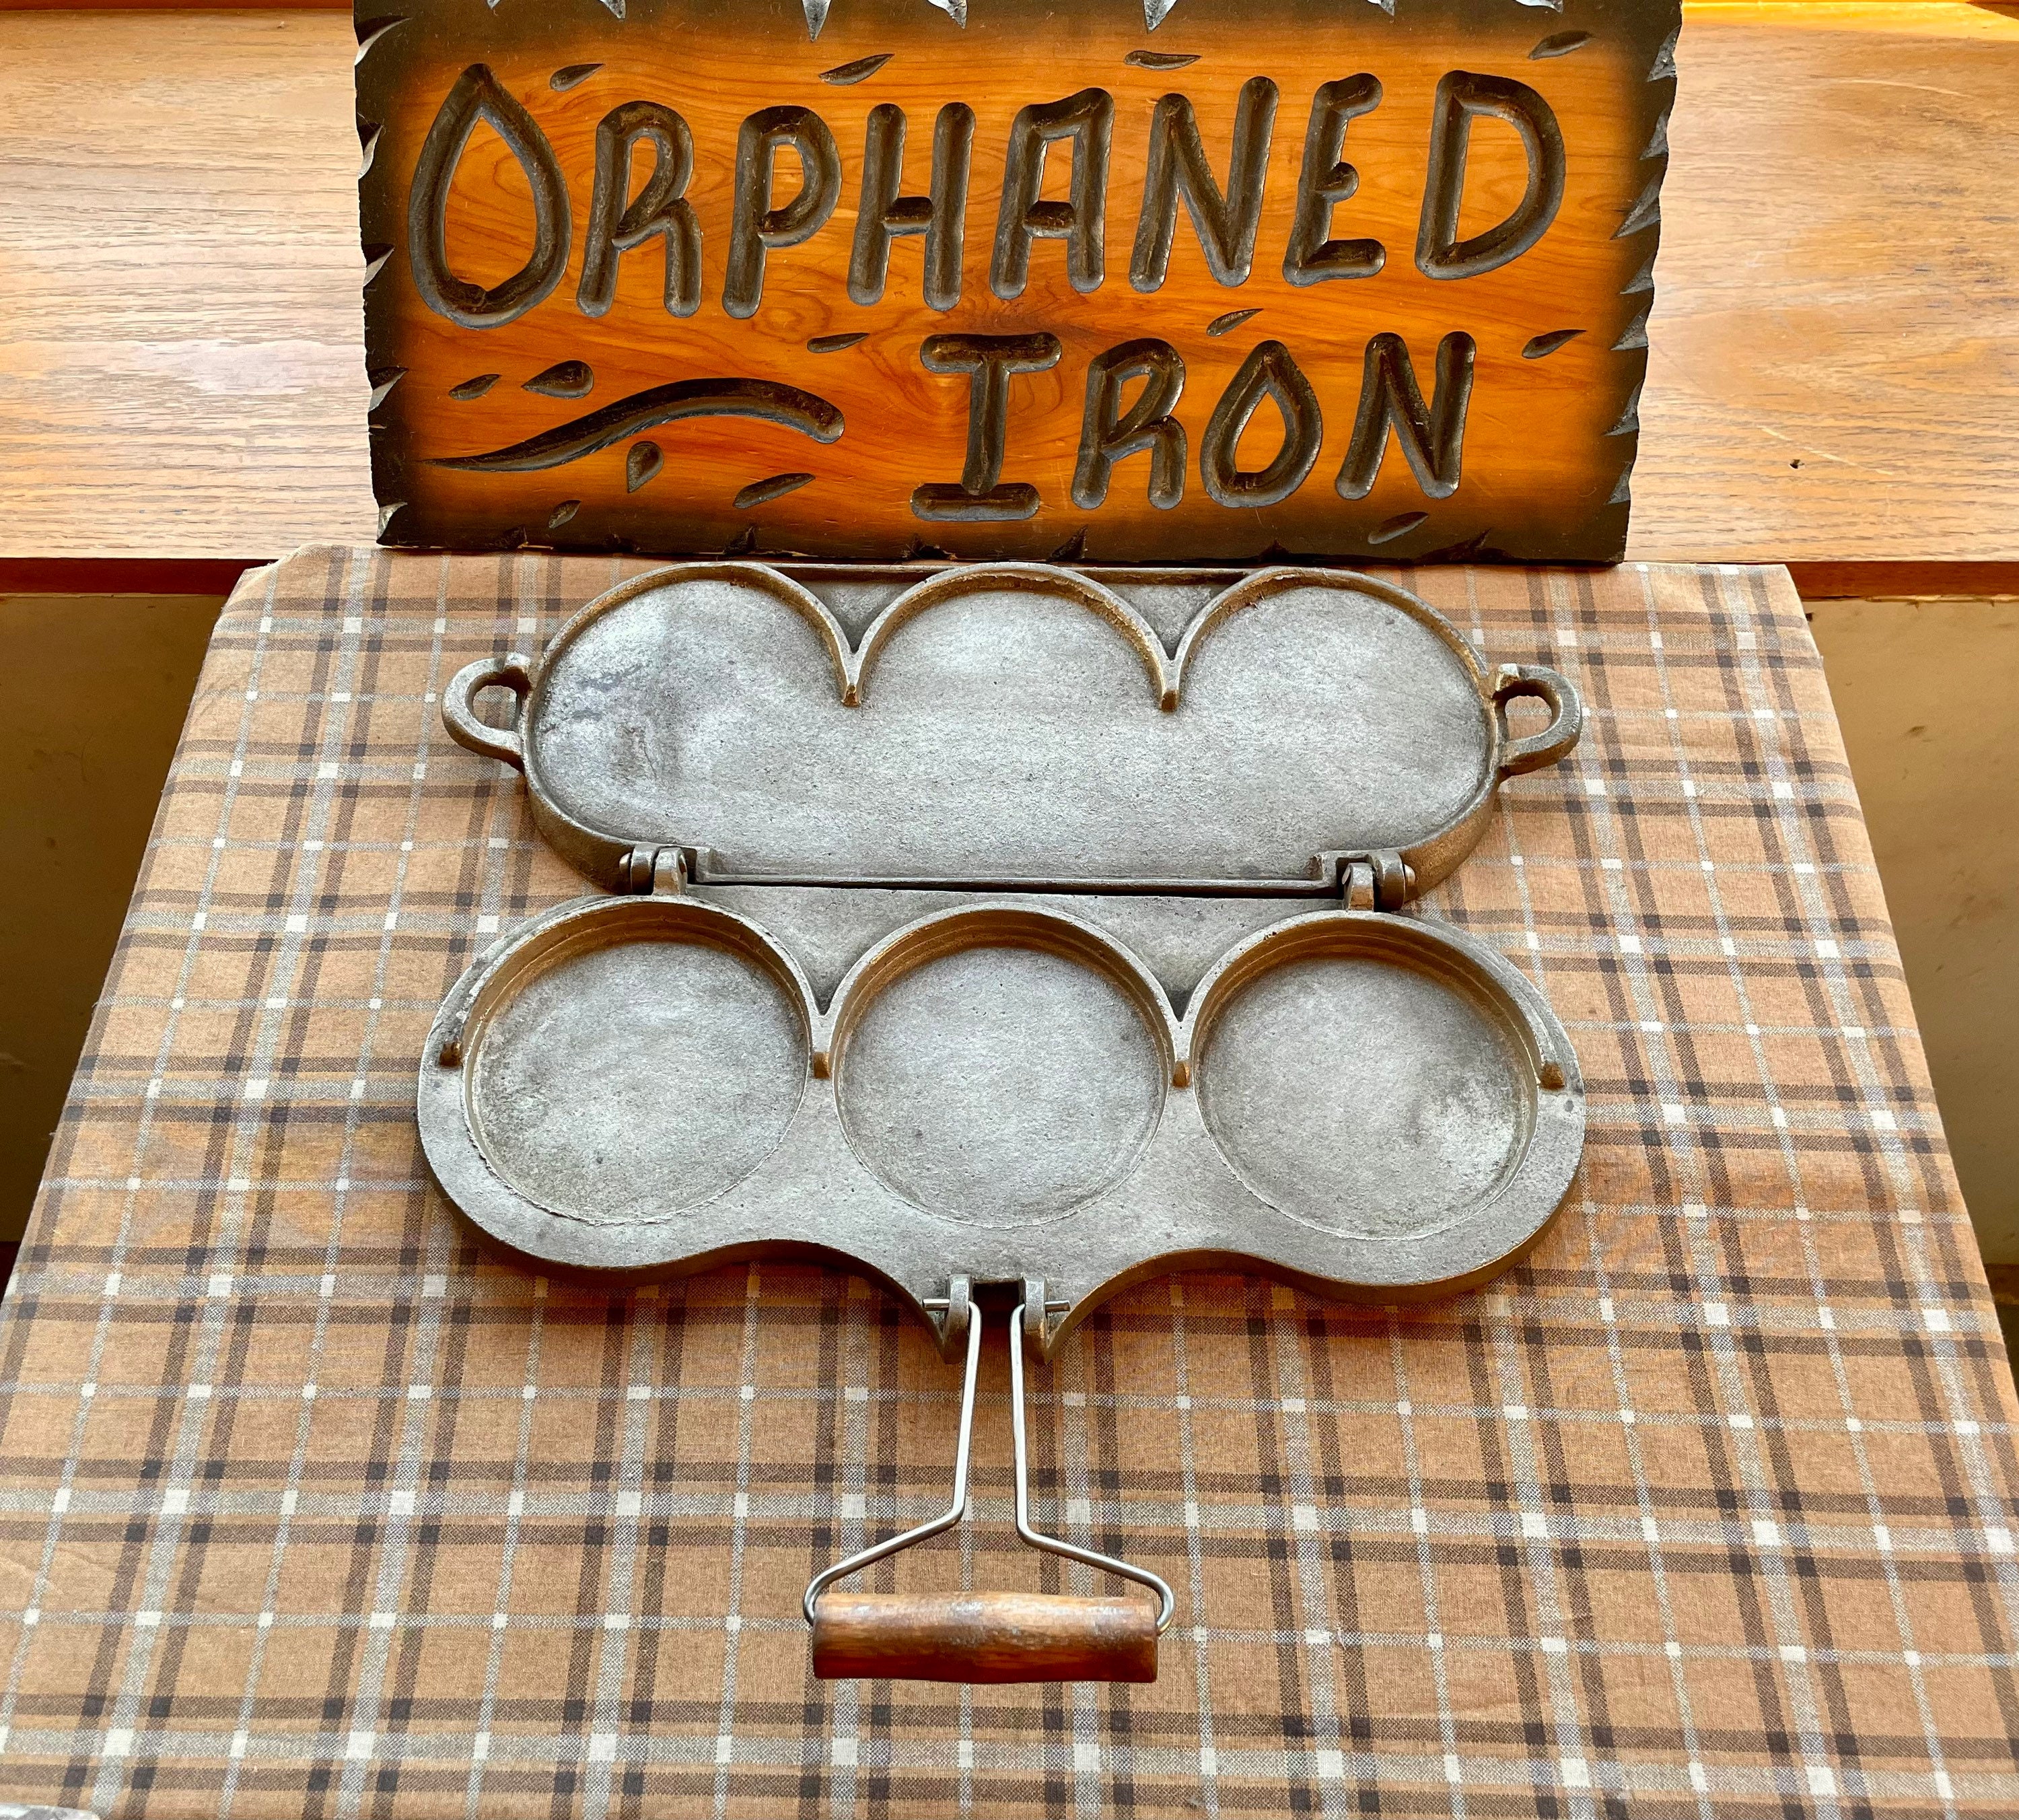 Cast Iron Pancake Griddle, Circa 1910: A Historical Journey: North of Huron